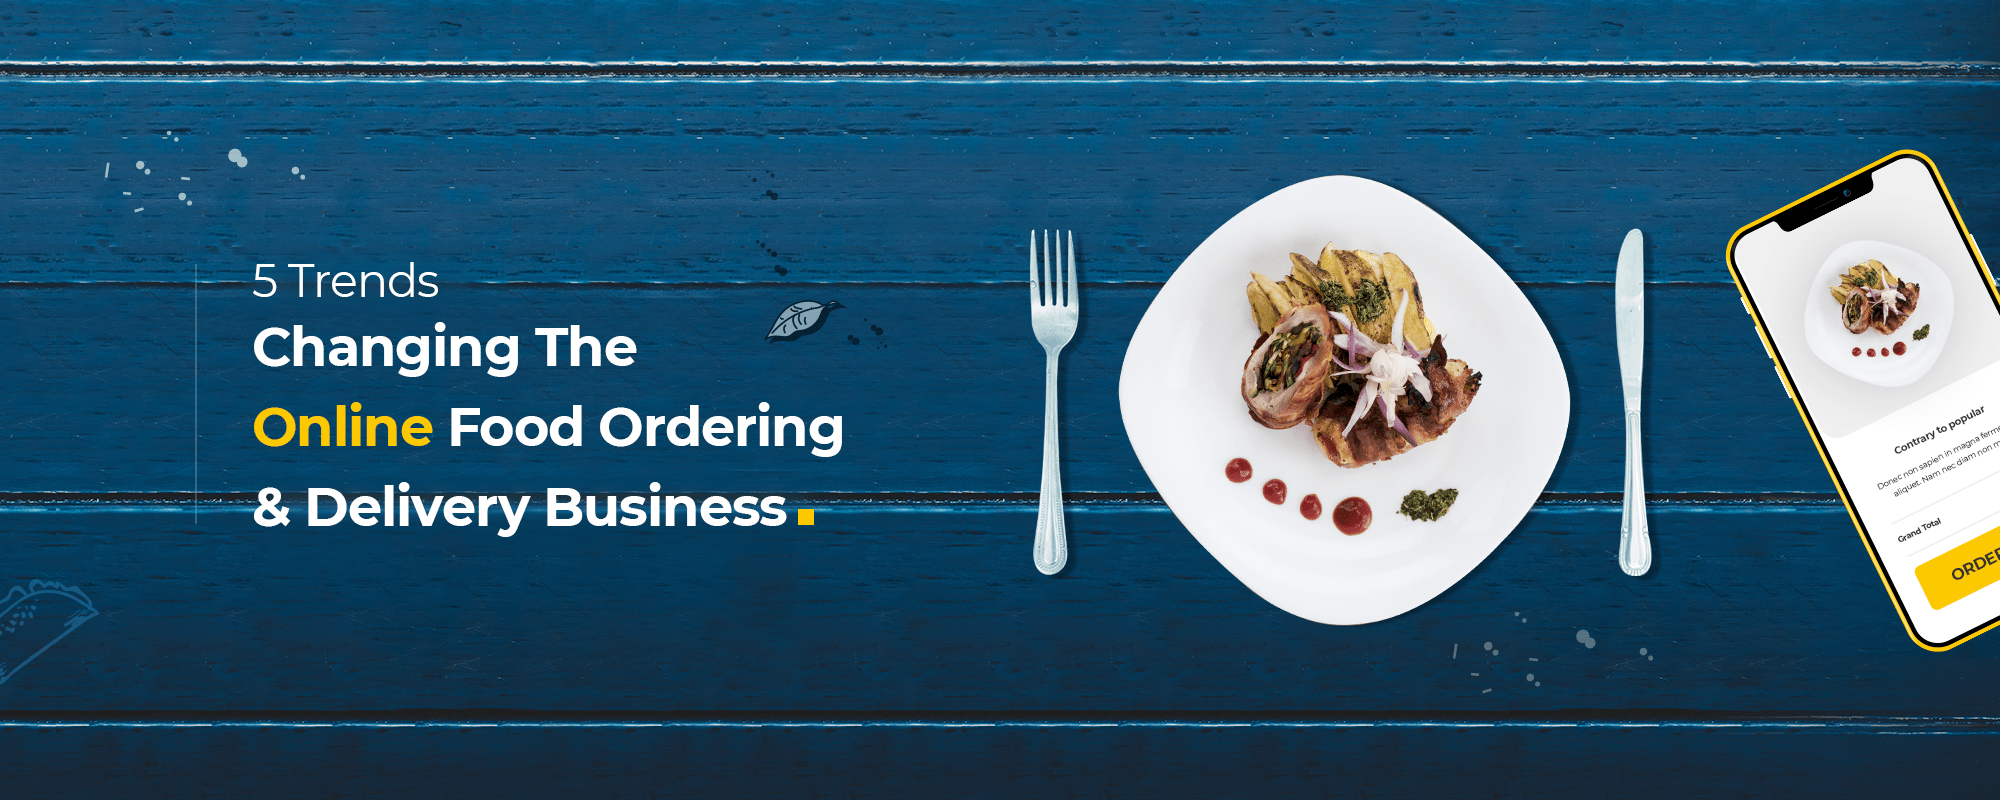 5 Trends Driving Changes in Online Food Ordering and Delivery Business